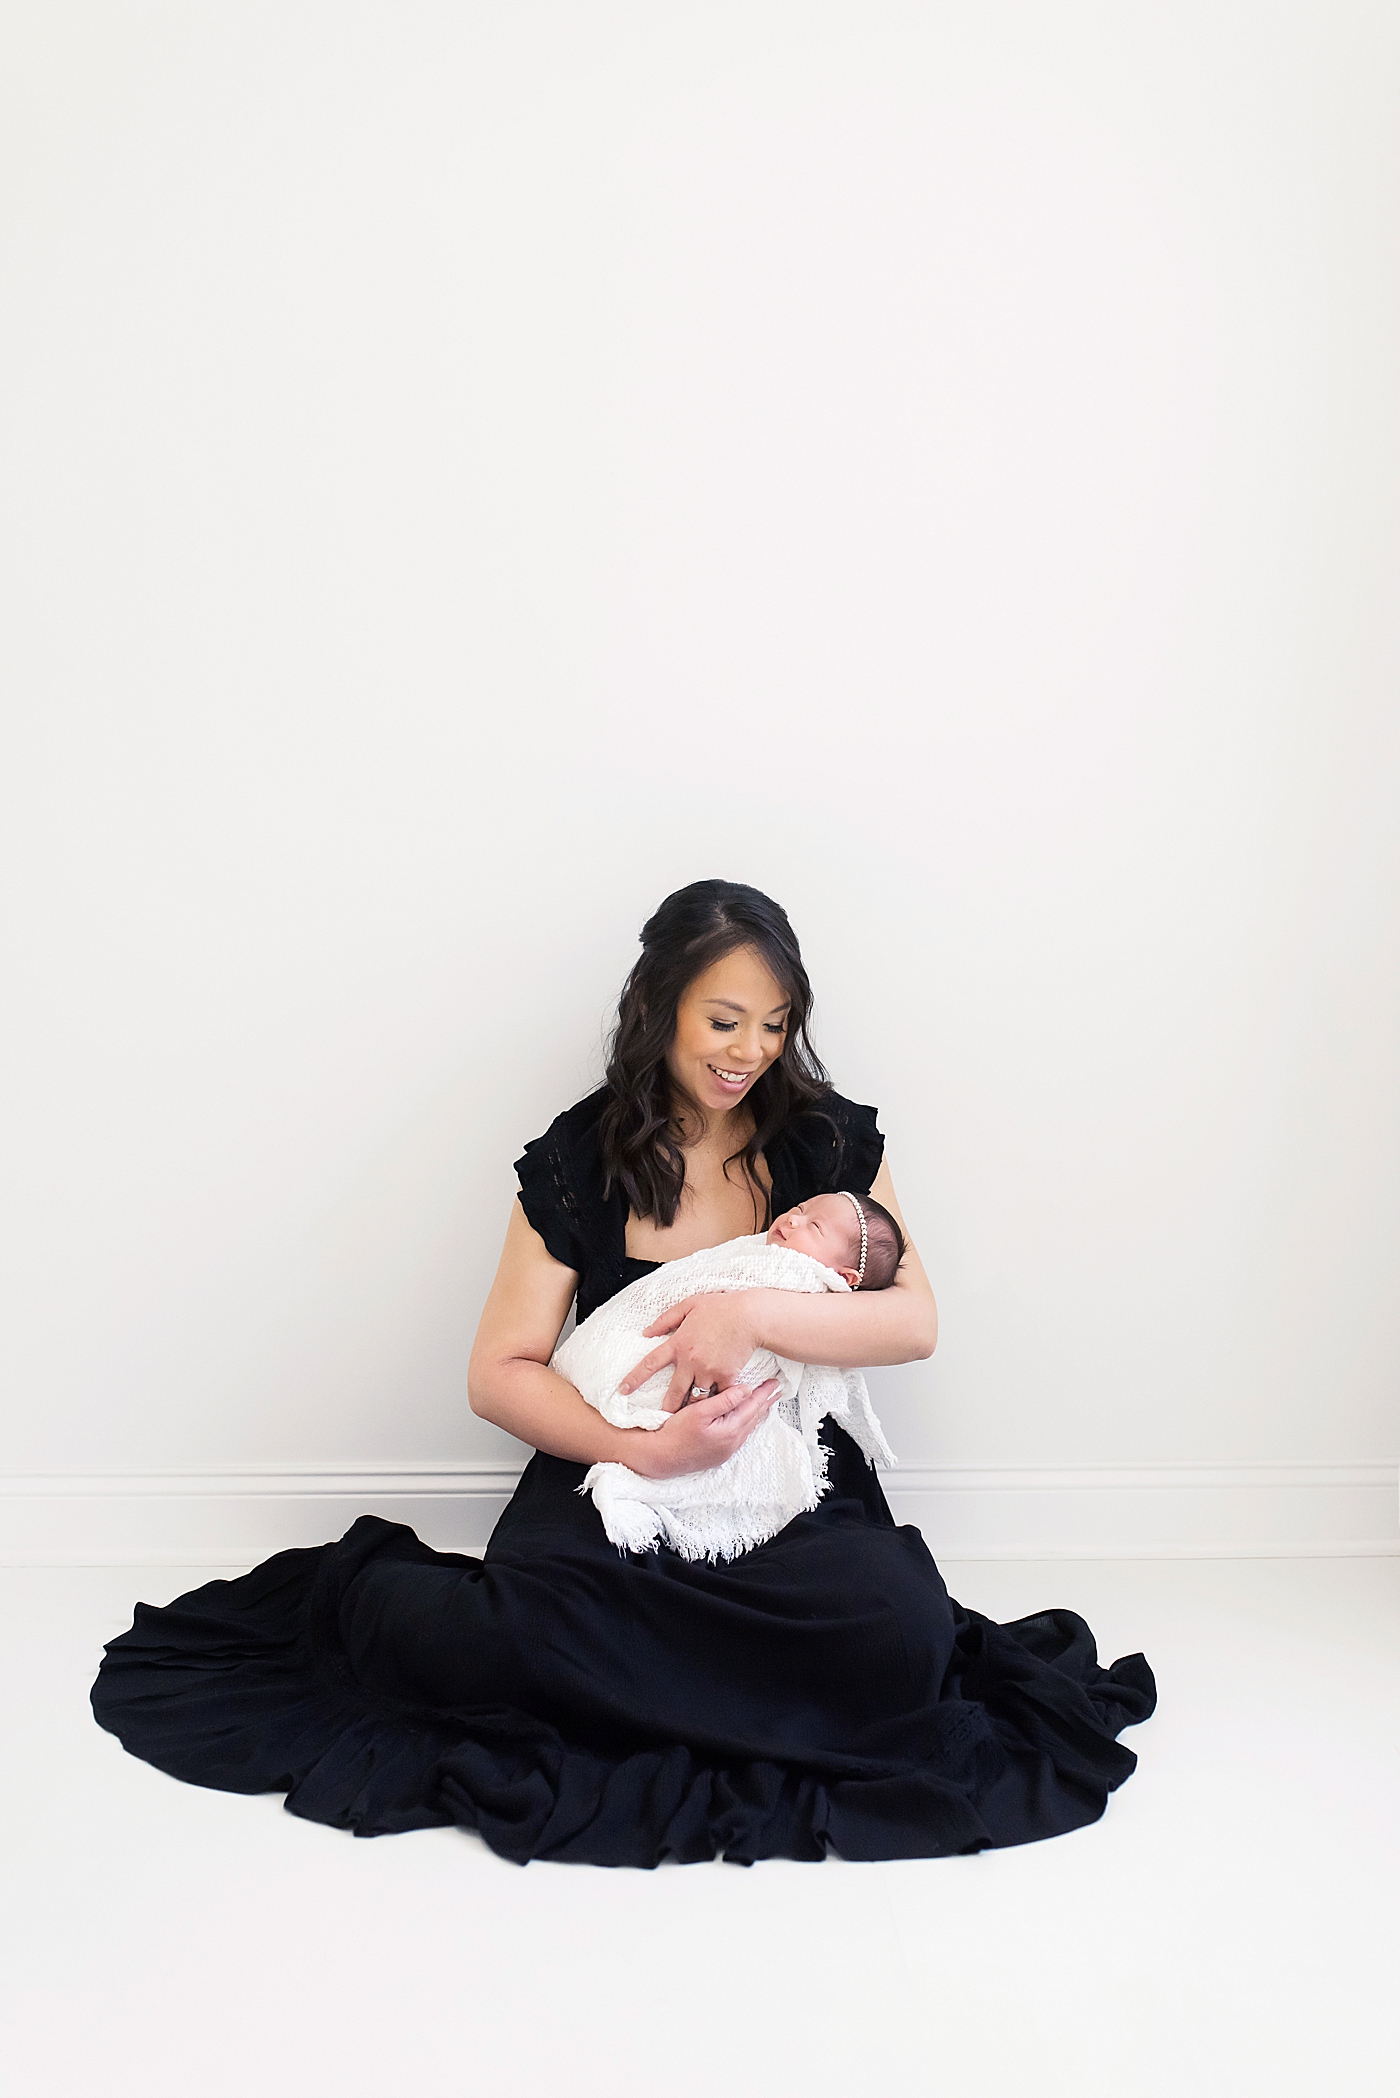 Newborn studio session for baby girl and mom in black dress | Photo by Anna Wisjo Photography